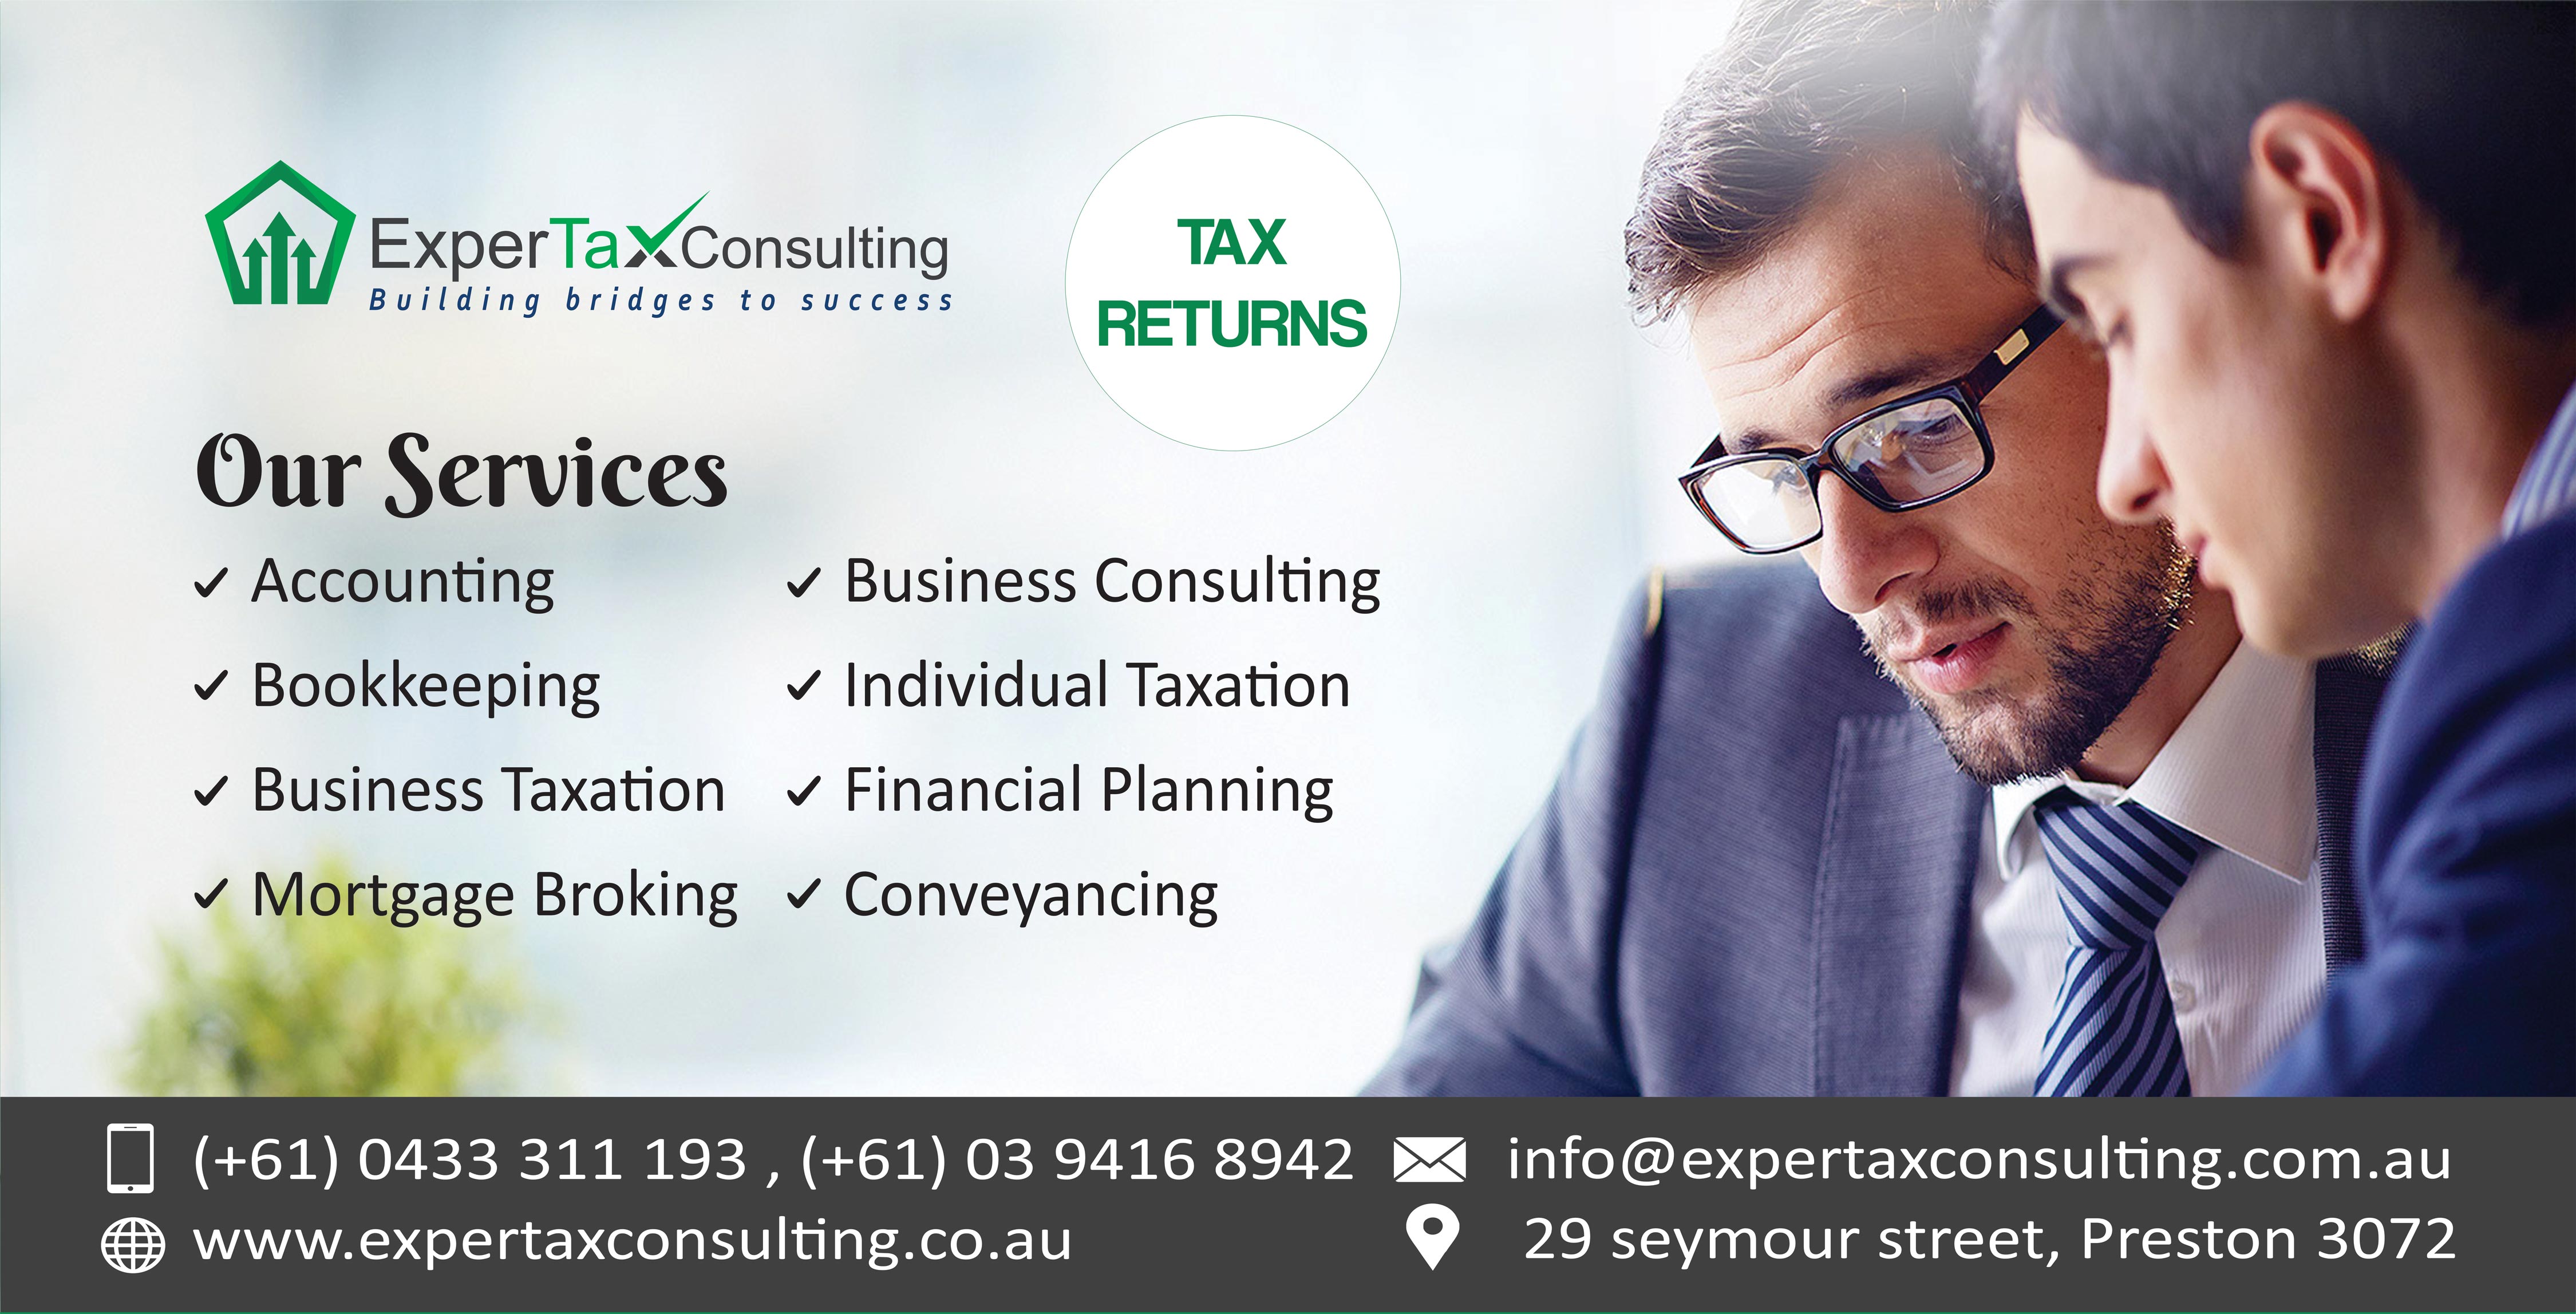 Expertaxconsulting